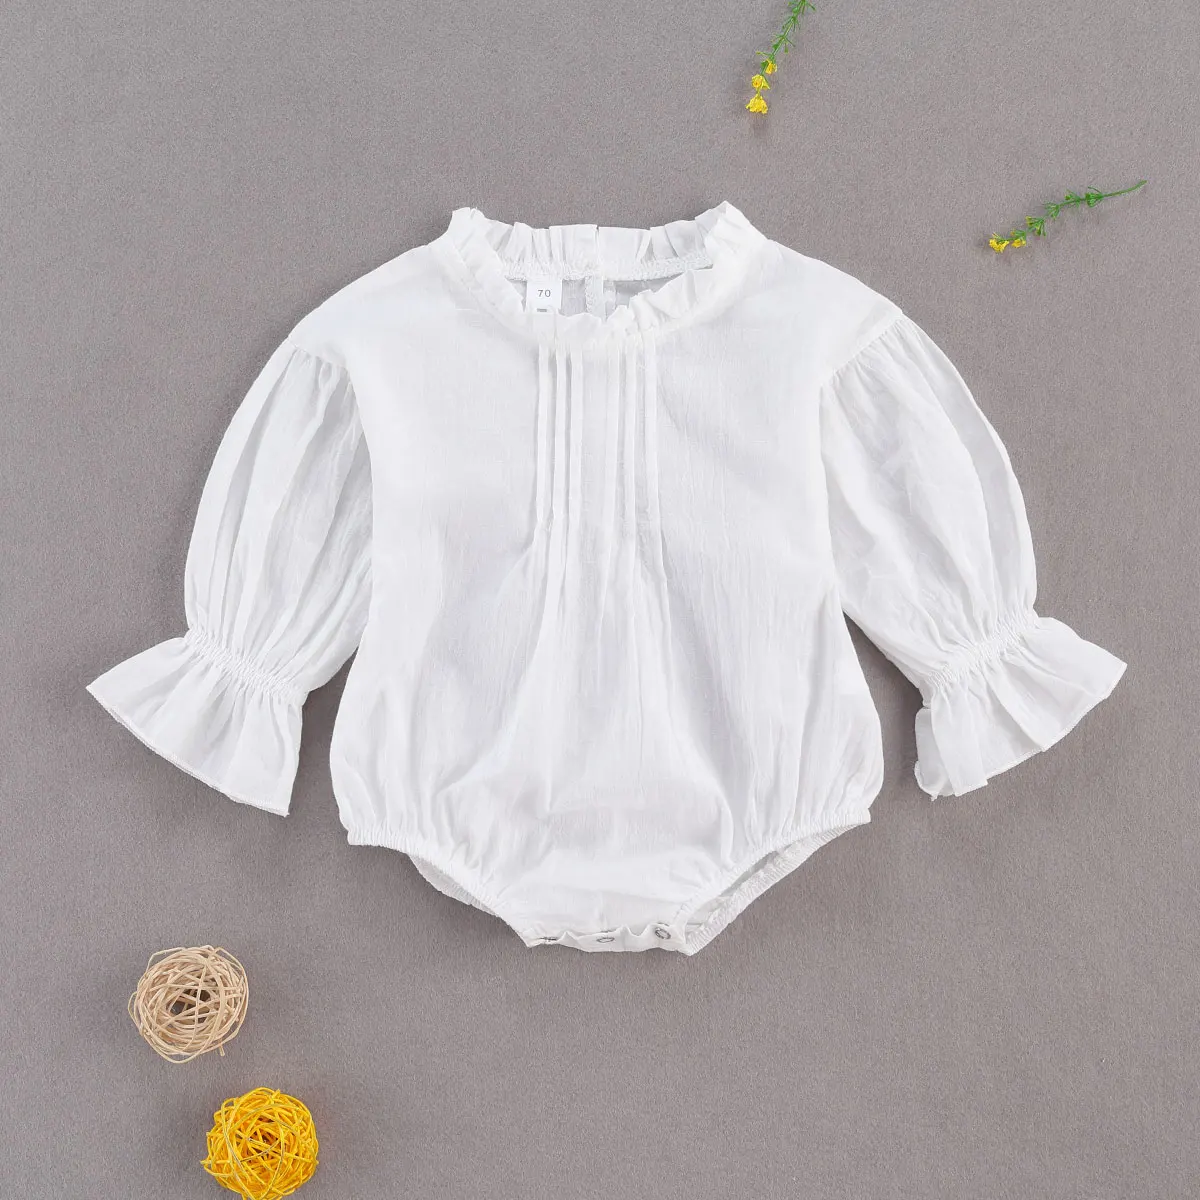 2021 Fashion 0-24M Infant Baby Girl Romper Shirt White Solid Long Sleeve O neck Top Playsuit Cute Puff Sleeve Blouse